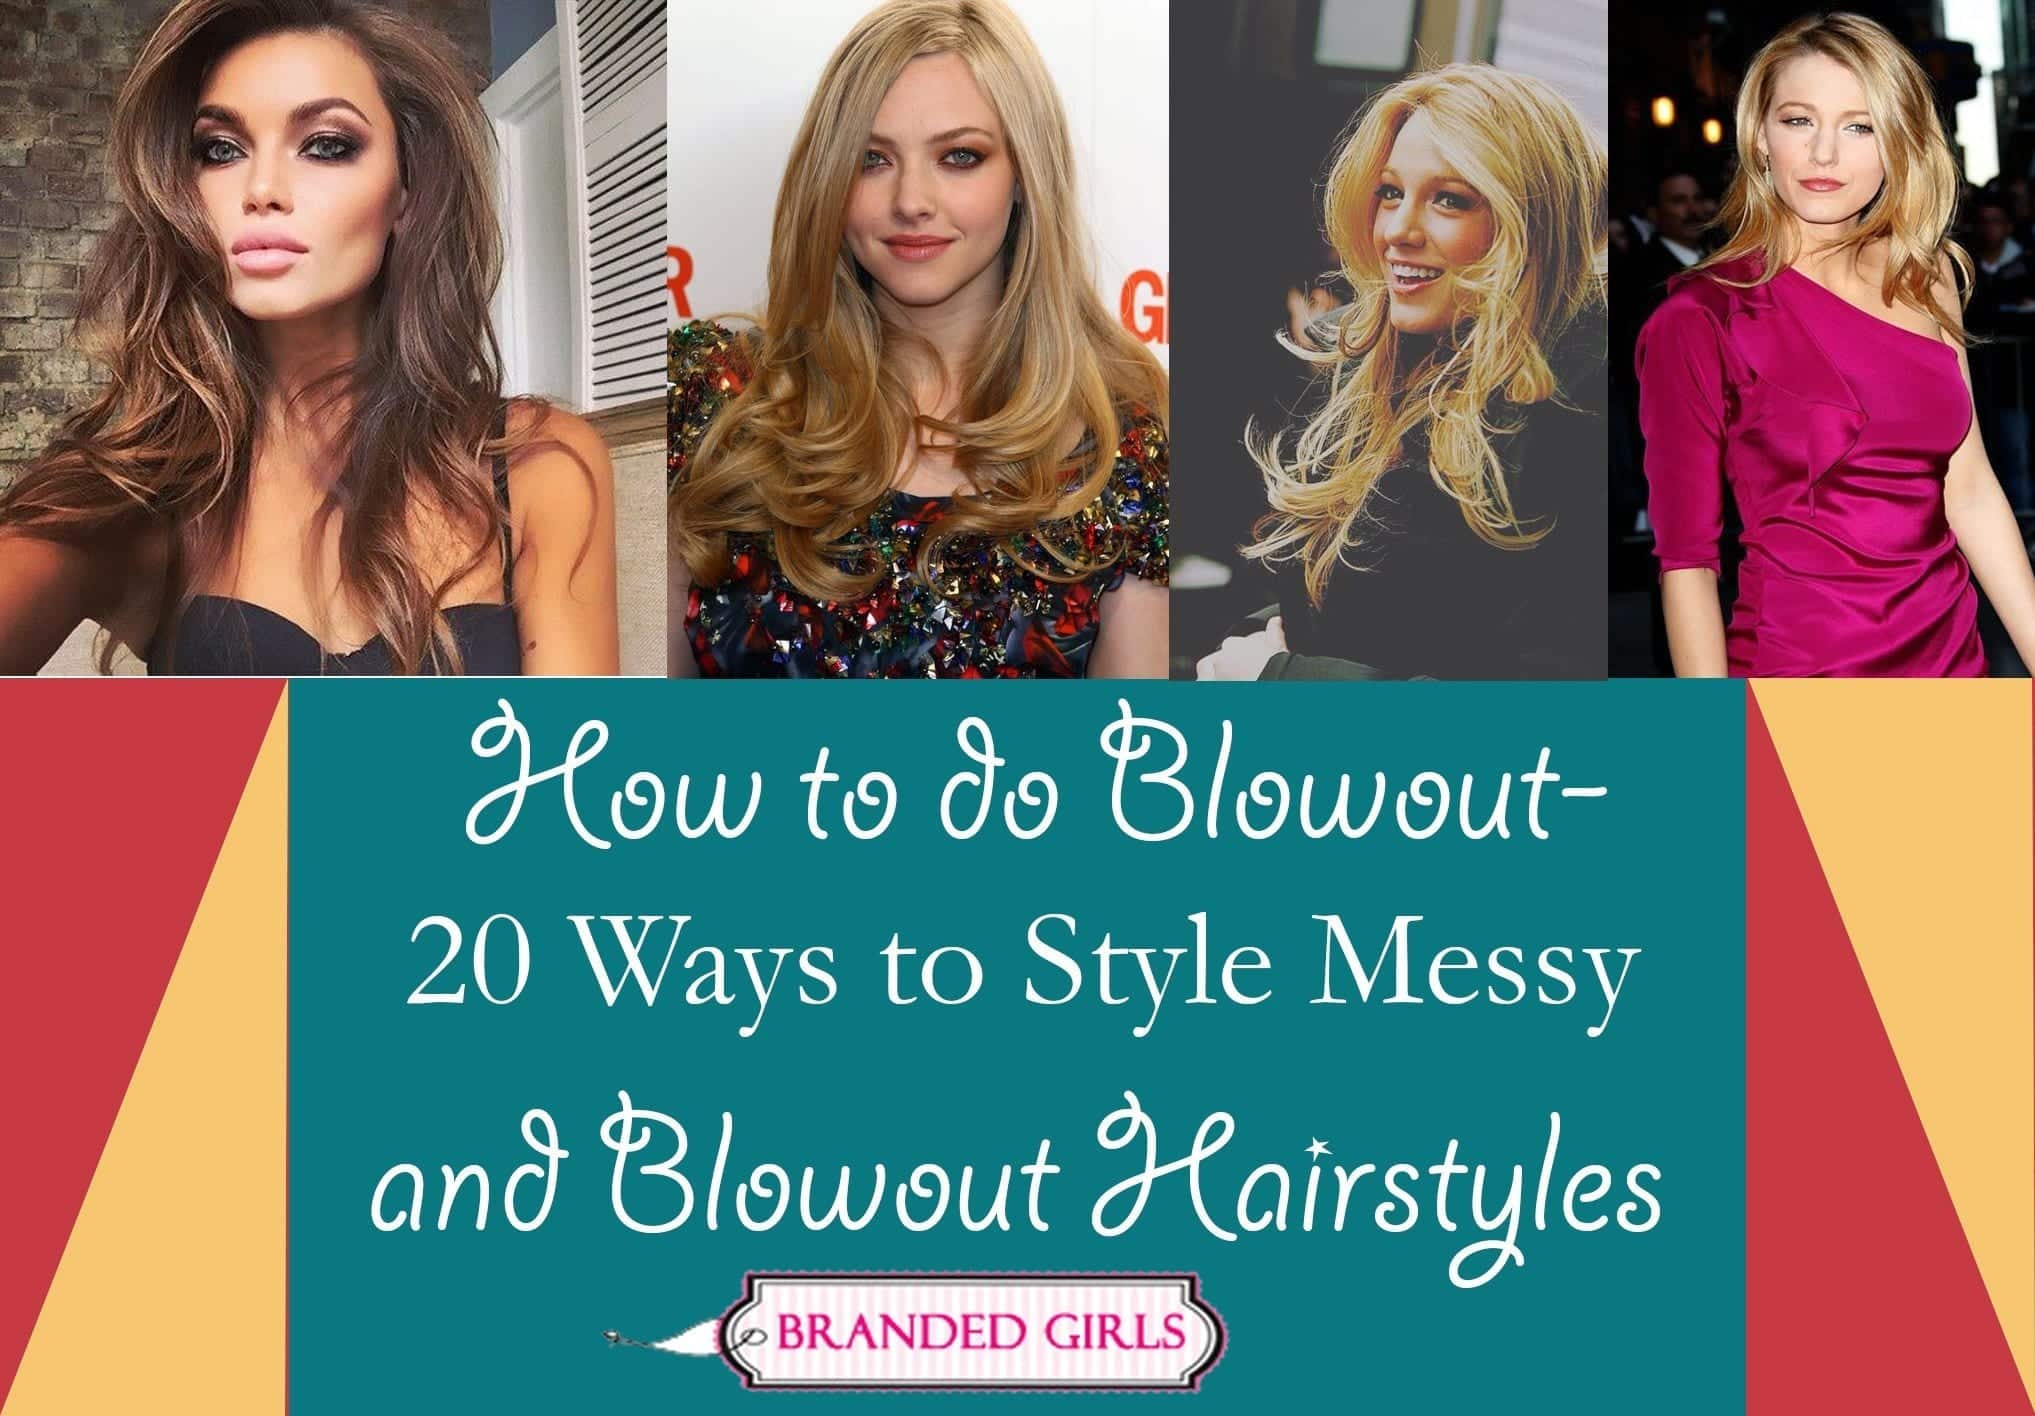 How to do Blowout-20 Ways to Style Messy and Blowout Hairstyle